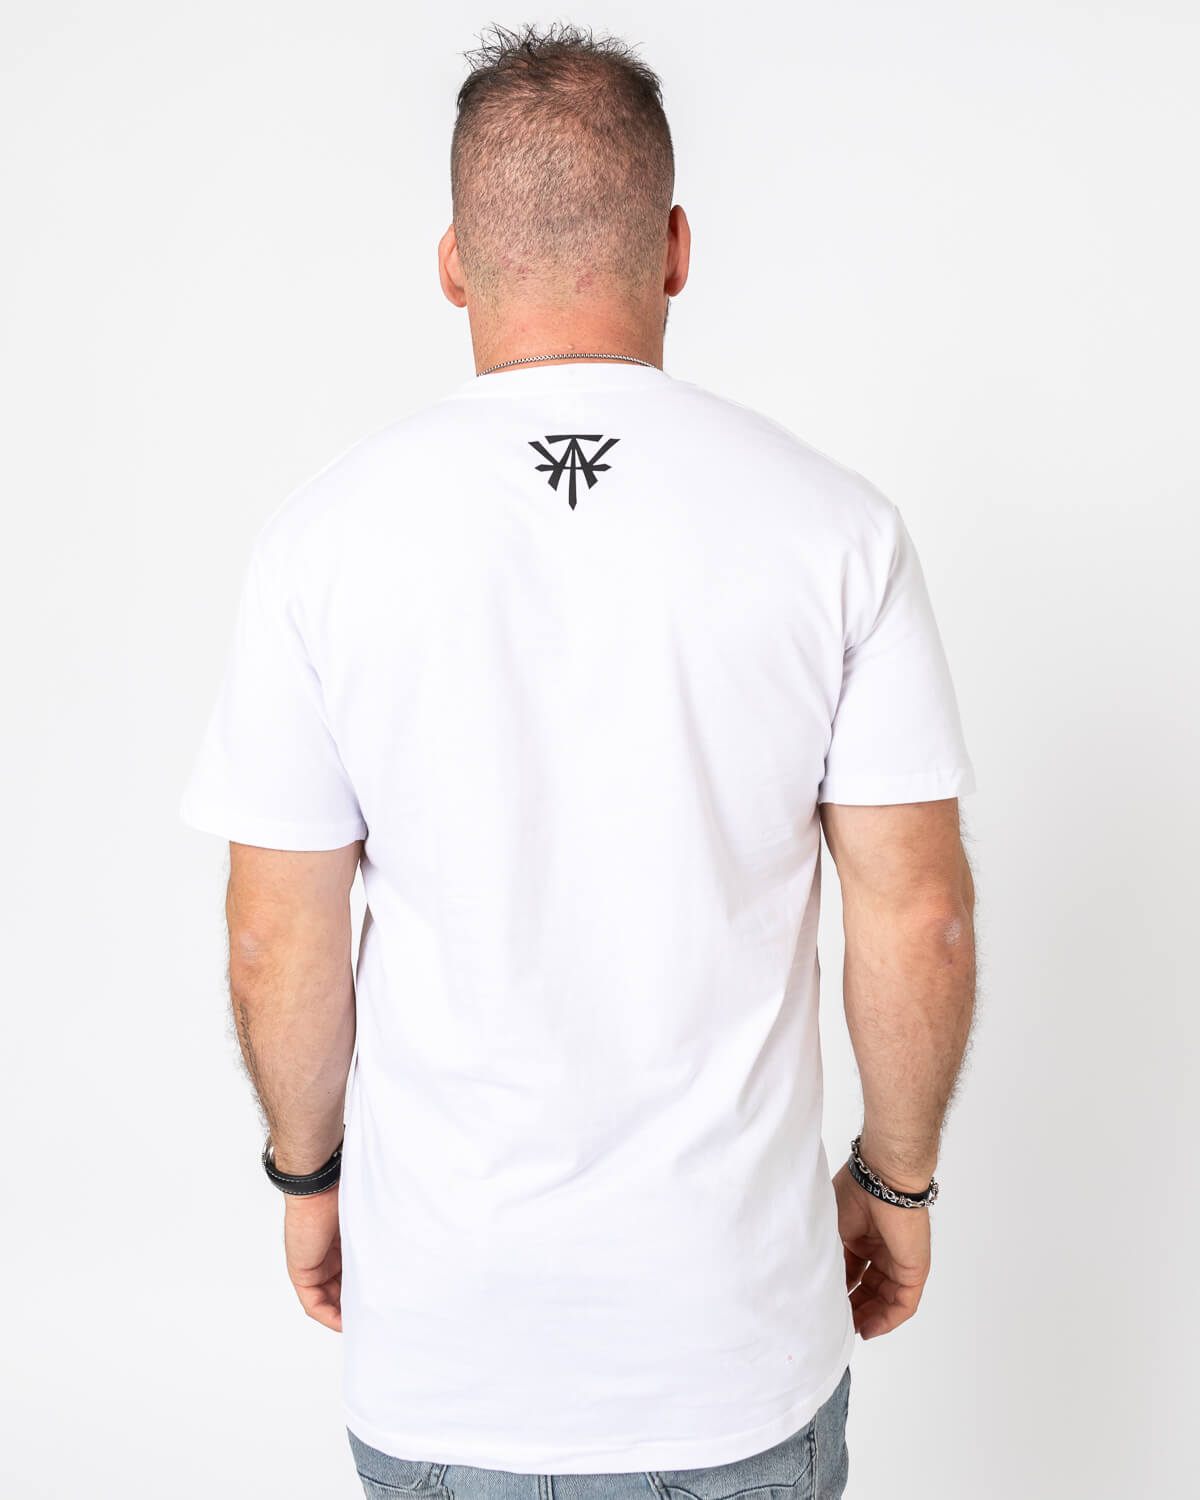 We Are The They - Back Logo - Tee - White